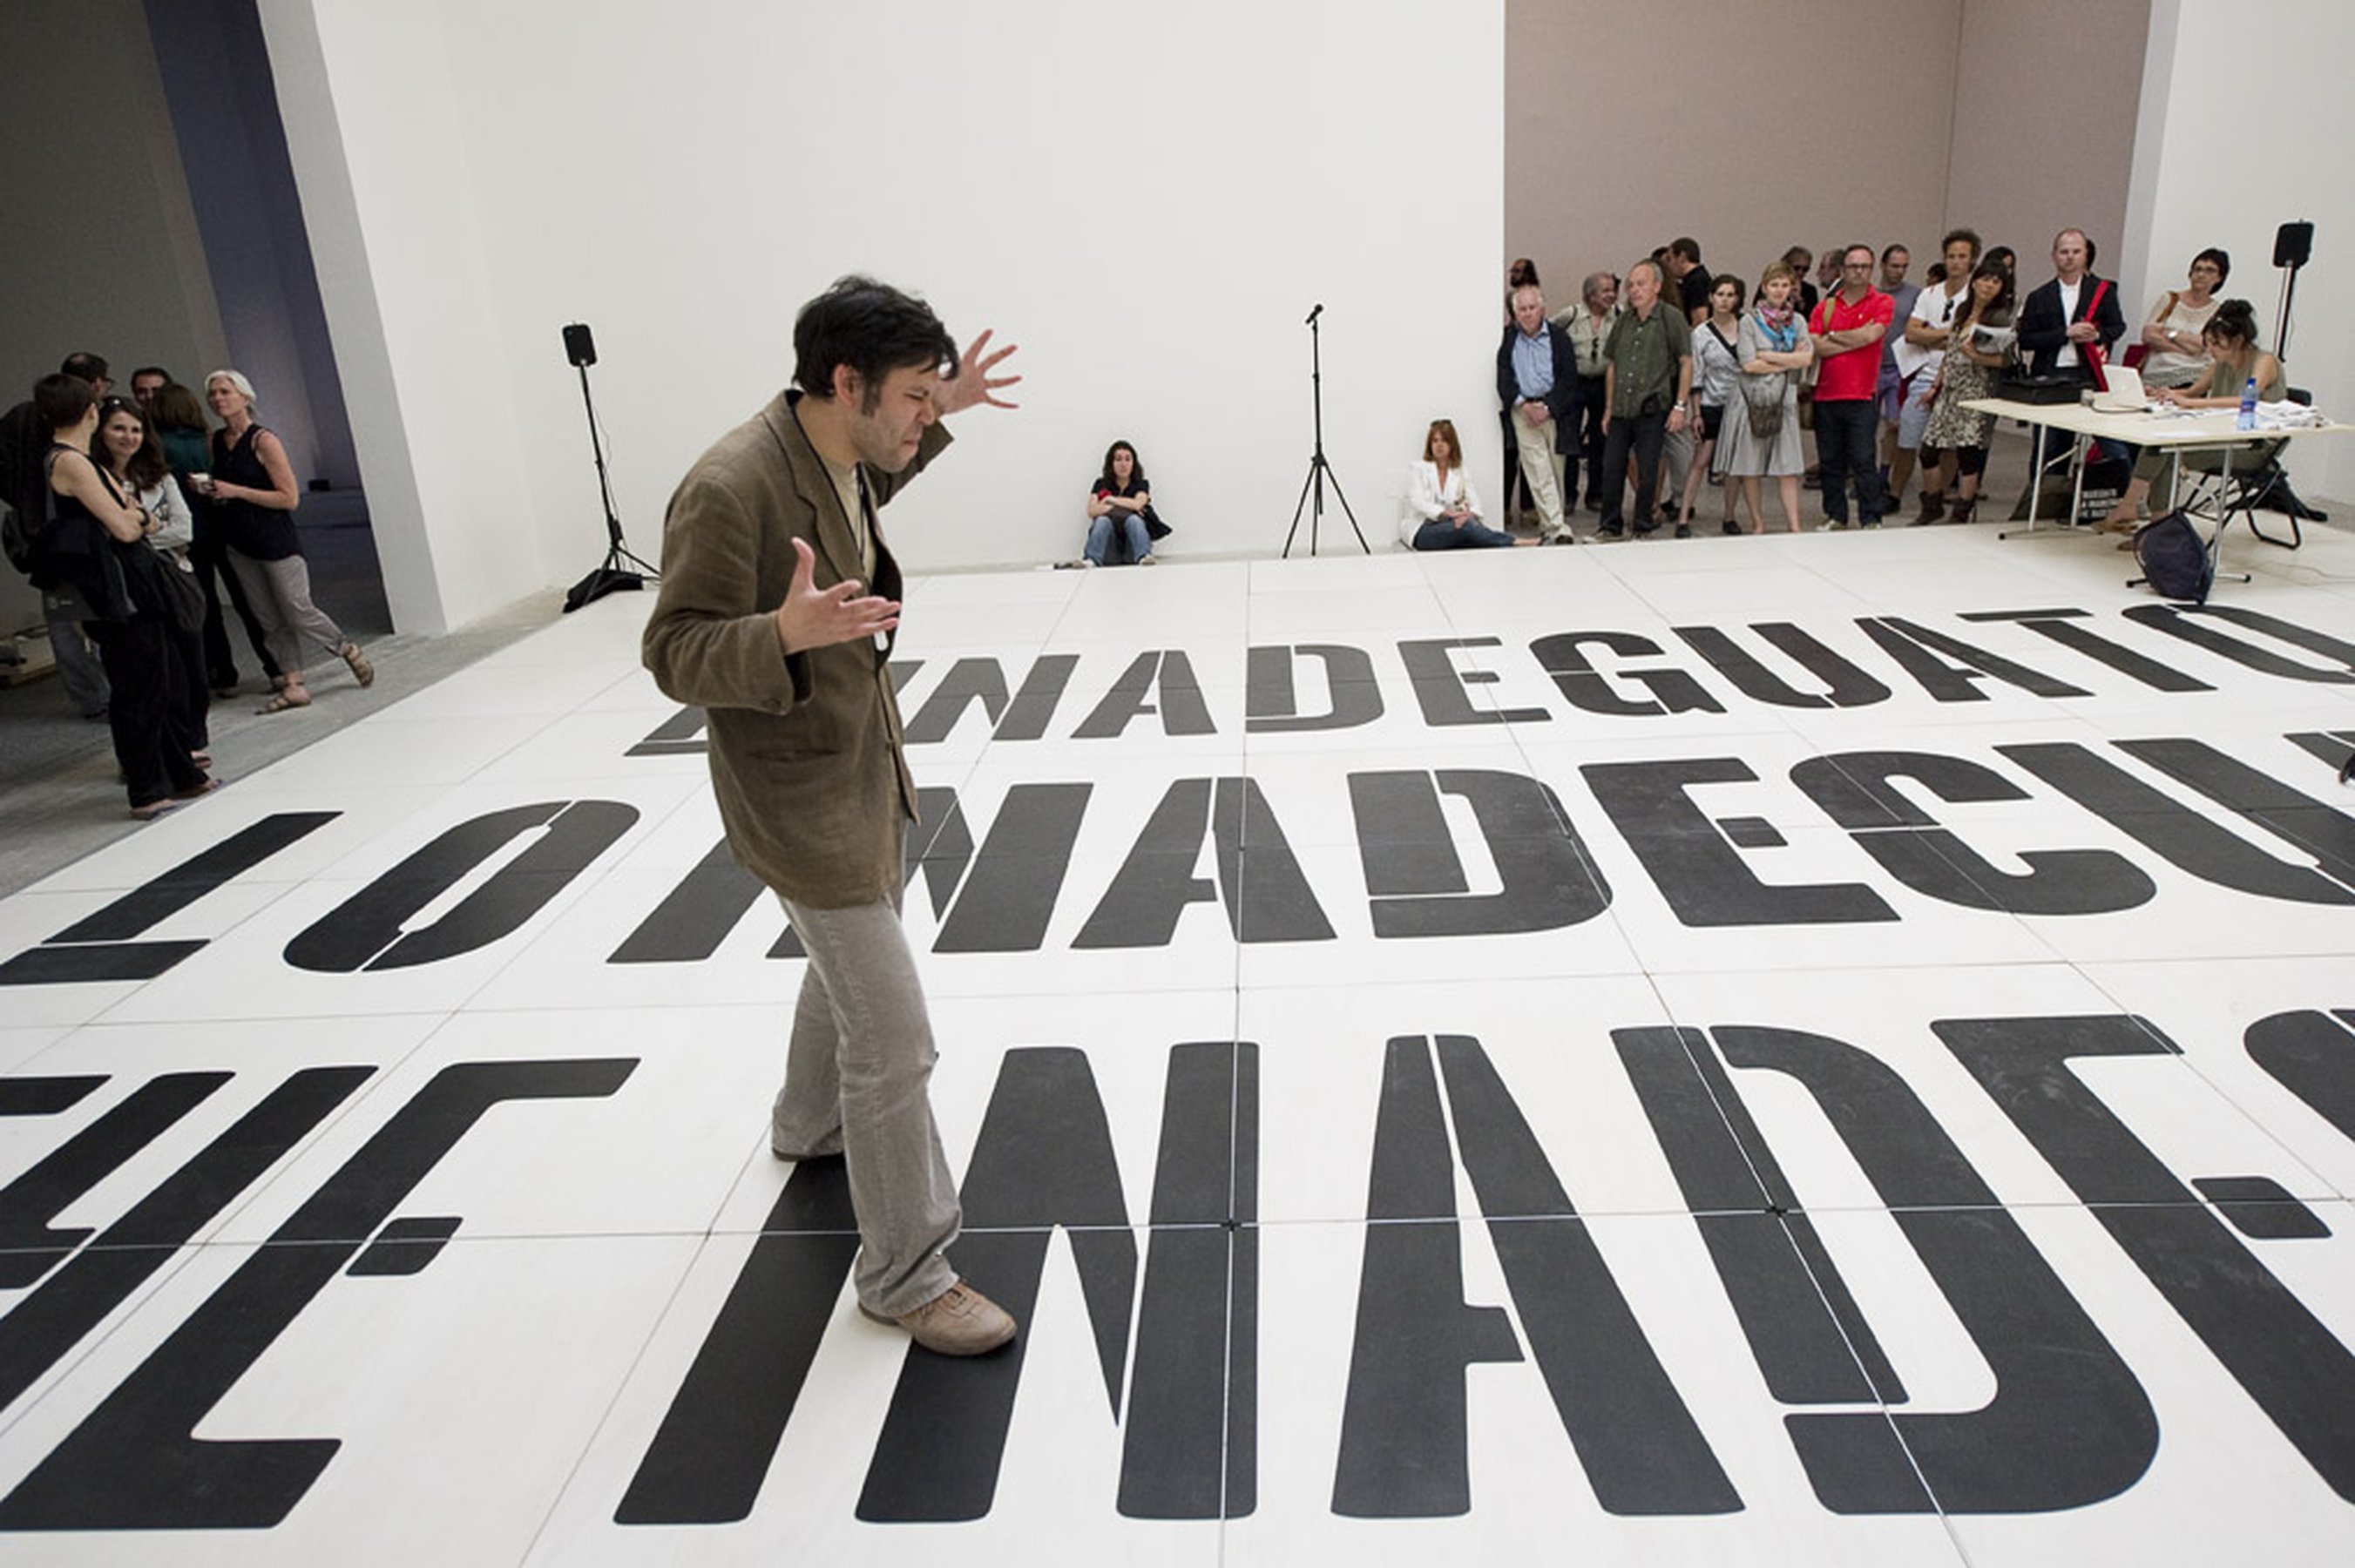 The Inadequate, 2011 Series of performances, conversations, theatre, debates at the Spanish Pavilion (54th Venice Biennale, 2011)